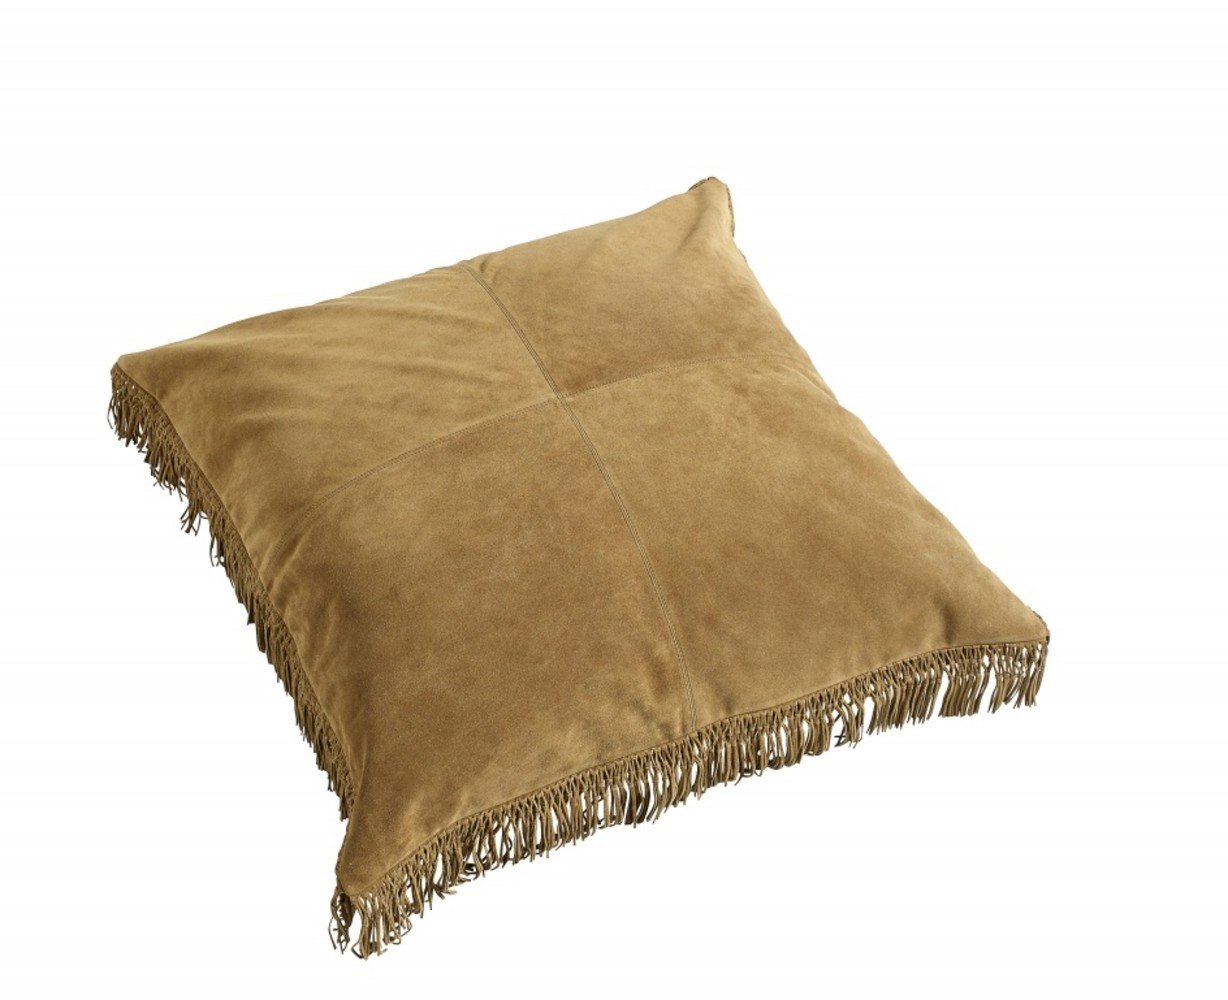 Cuscino in pelle Nordal Hippie incl. Imbottitura - marrone 80x80 cm -  LIVING AND CO.